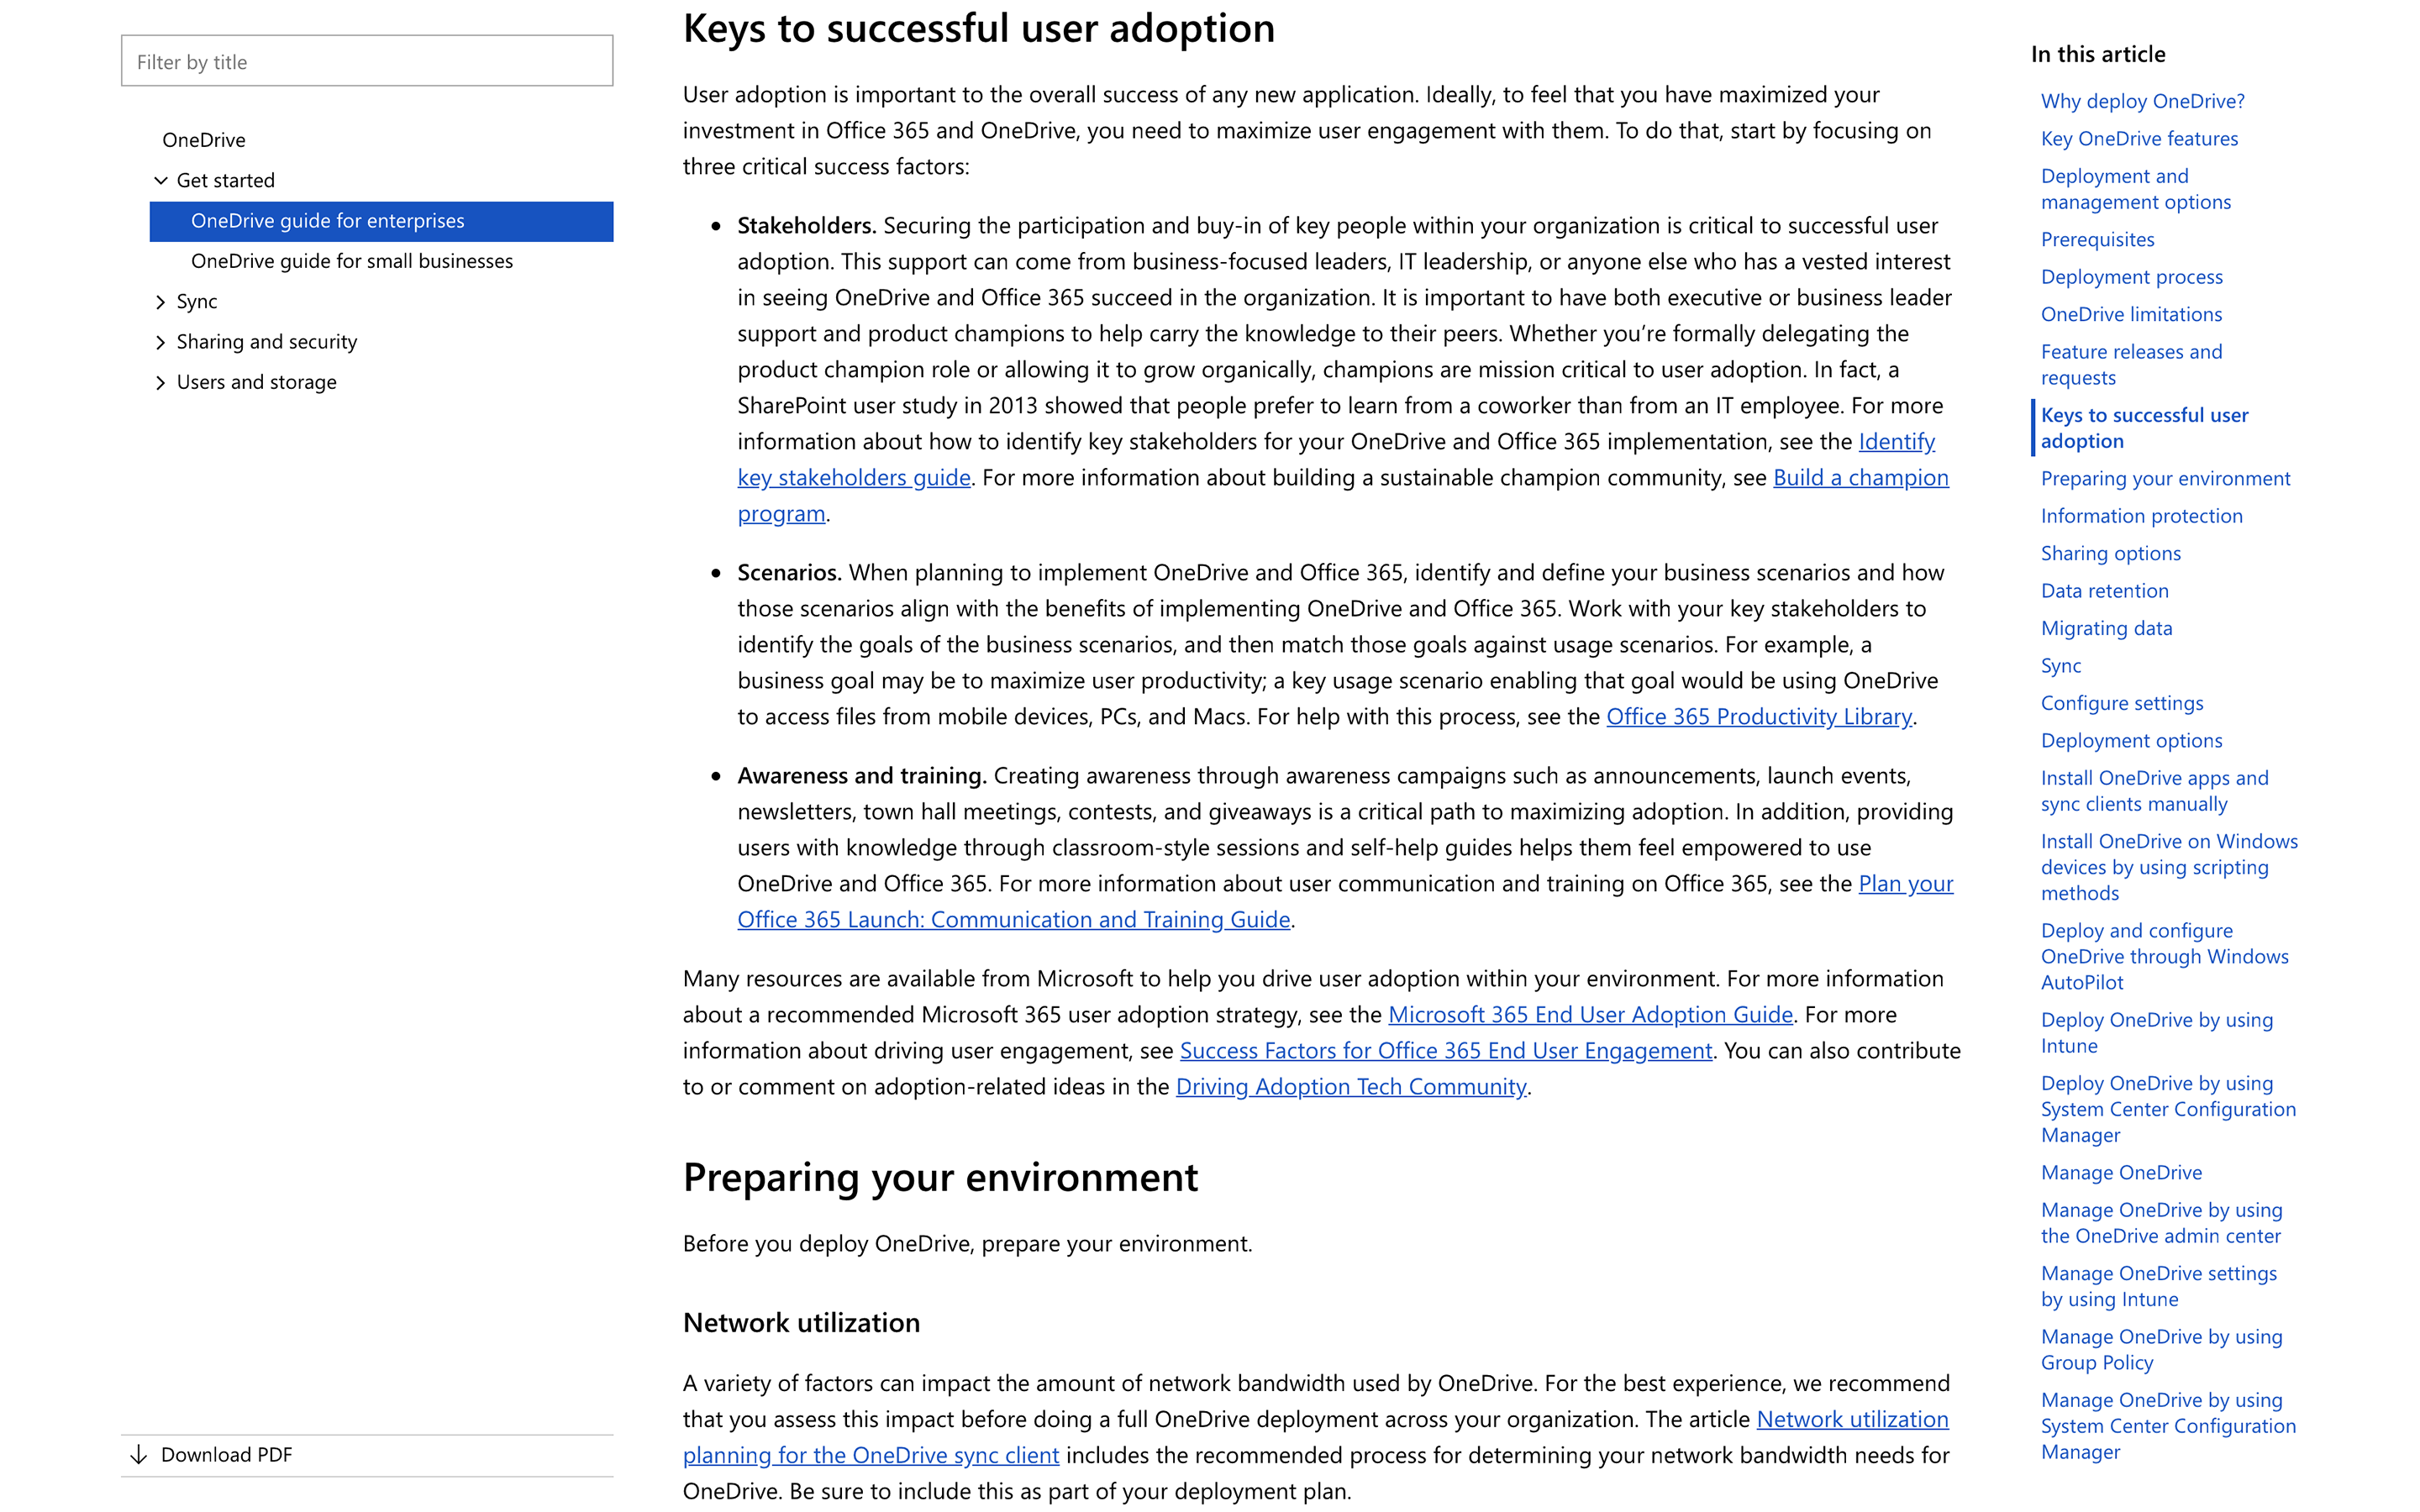 Screenshot of the “Keys to successful user adoption” section